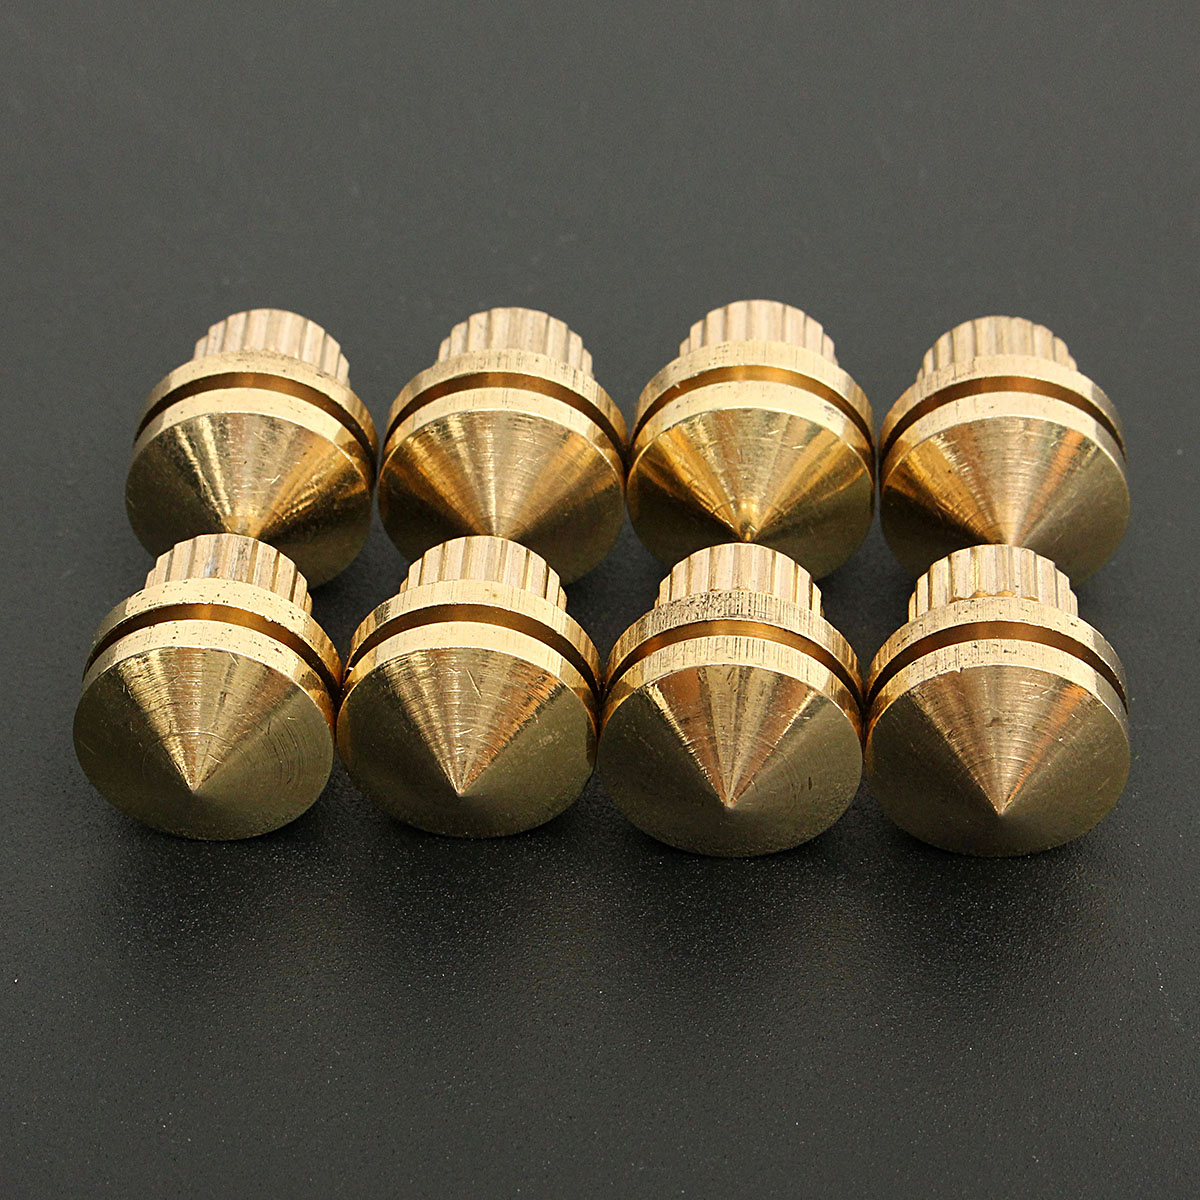 

8pcs HIFI M8 Copper Speaker Suspension Spikes Isolation Stands Feet Pads Base